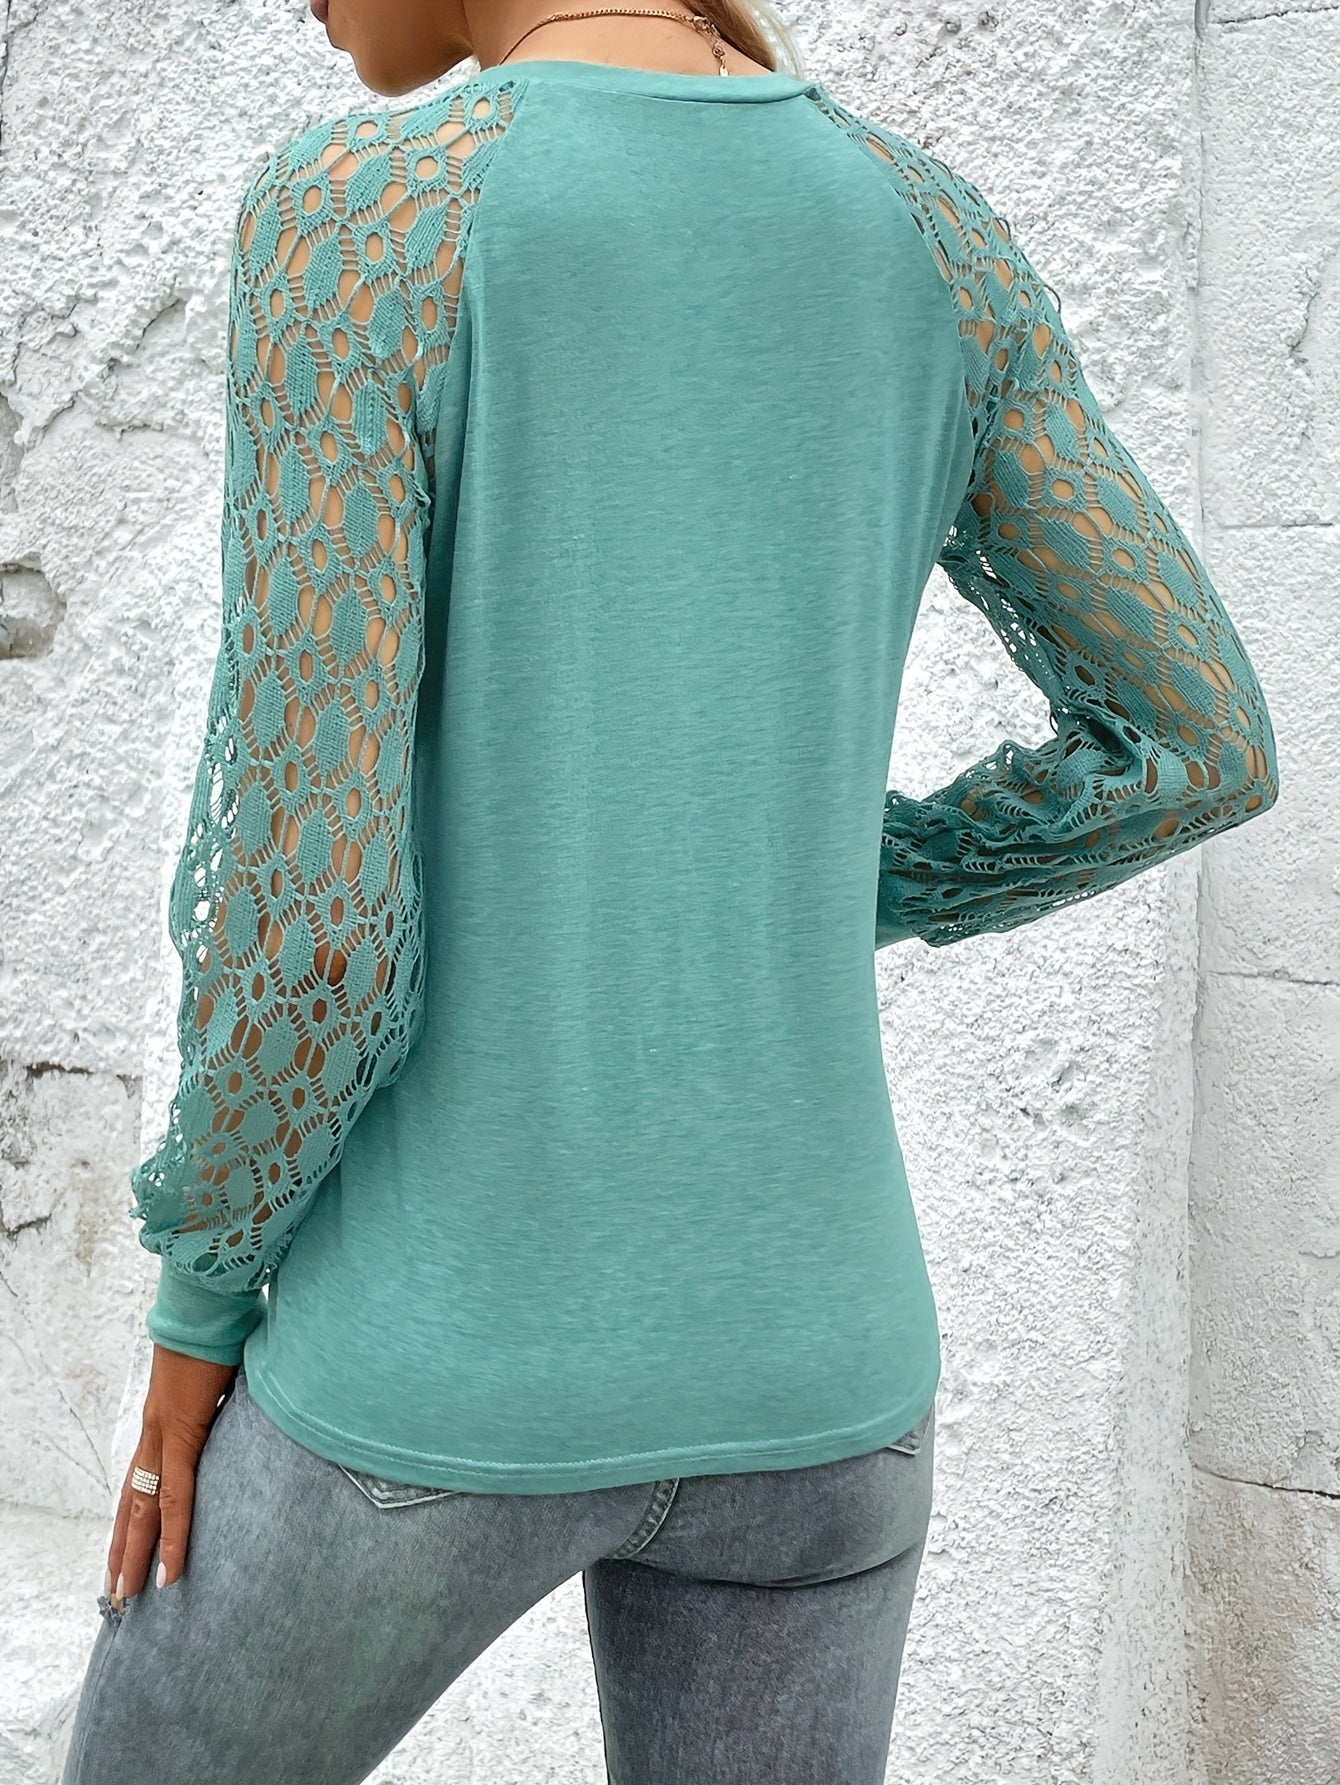 Contrast Lace Crew Neck Knitted Top, Elegant Long Sleeve Sweater For Spring & Fall, Women's Clothing